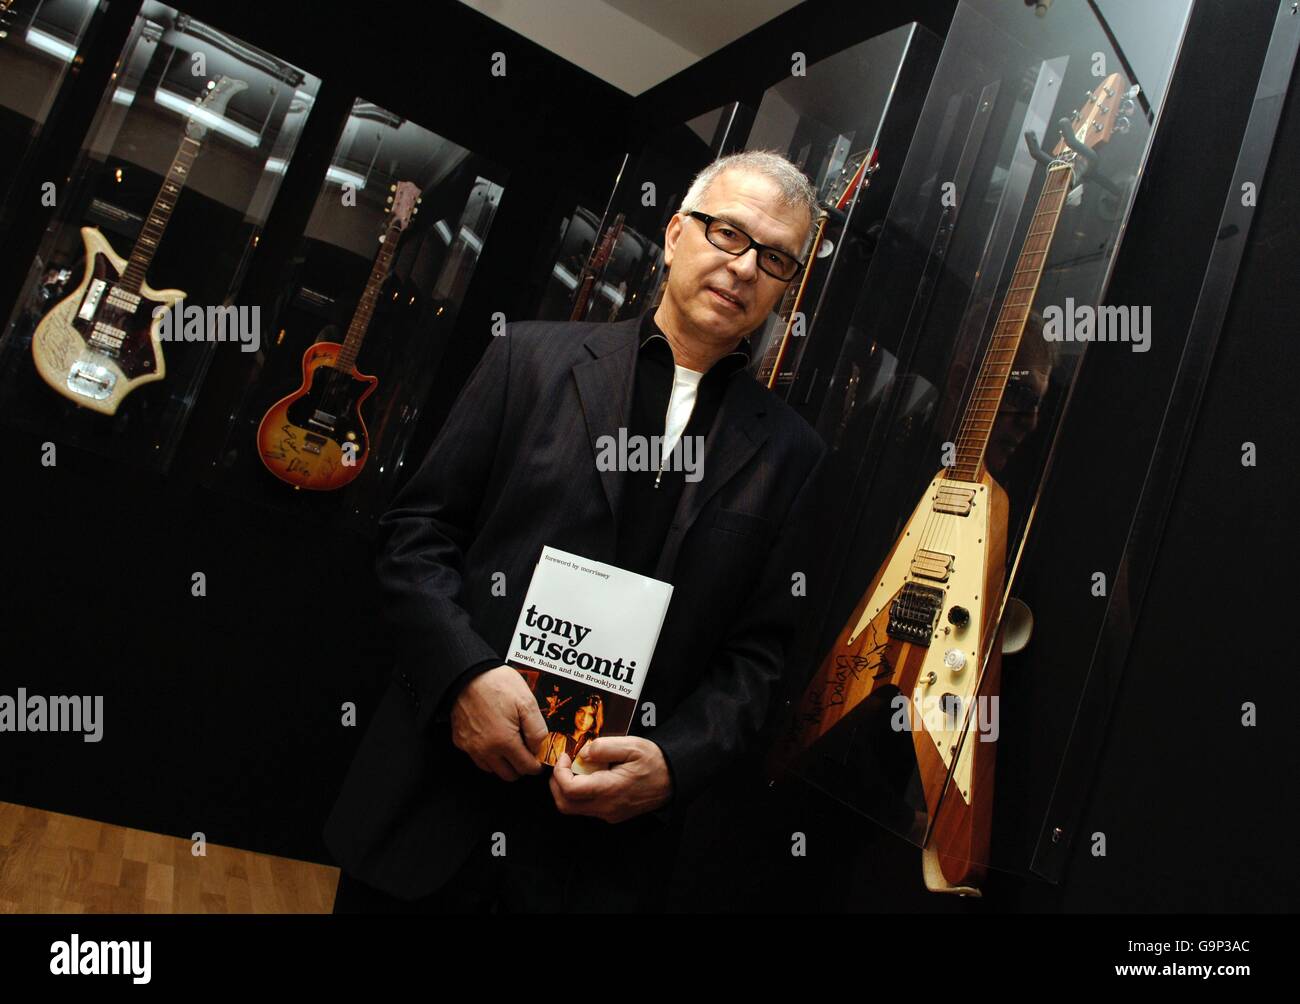 Legendary American music producer Tony Visconti poses next to a 1970 Hoyer Flying Arrow guitar, as played by Marc Bolan, during a signing session for his book 'Bowie, Bolan and the Brooklyn Boy', at Harrods in central London. Stock Photo